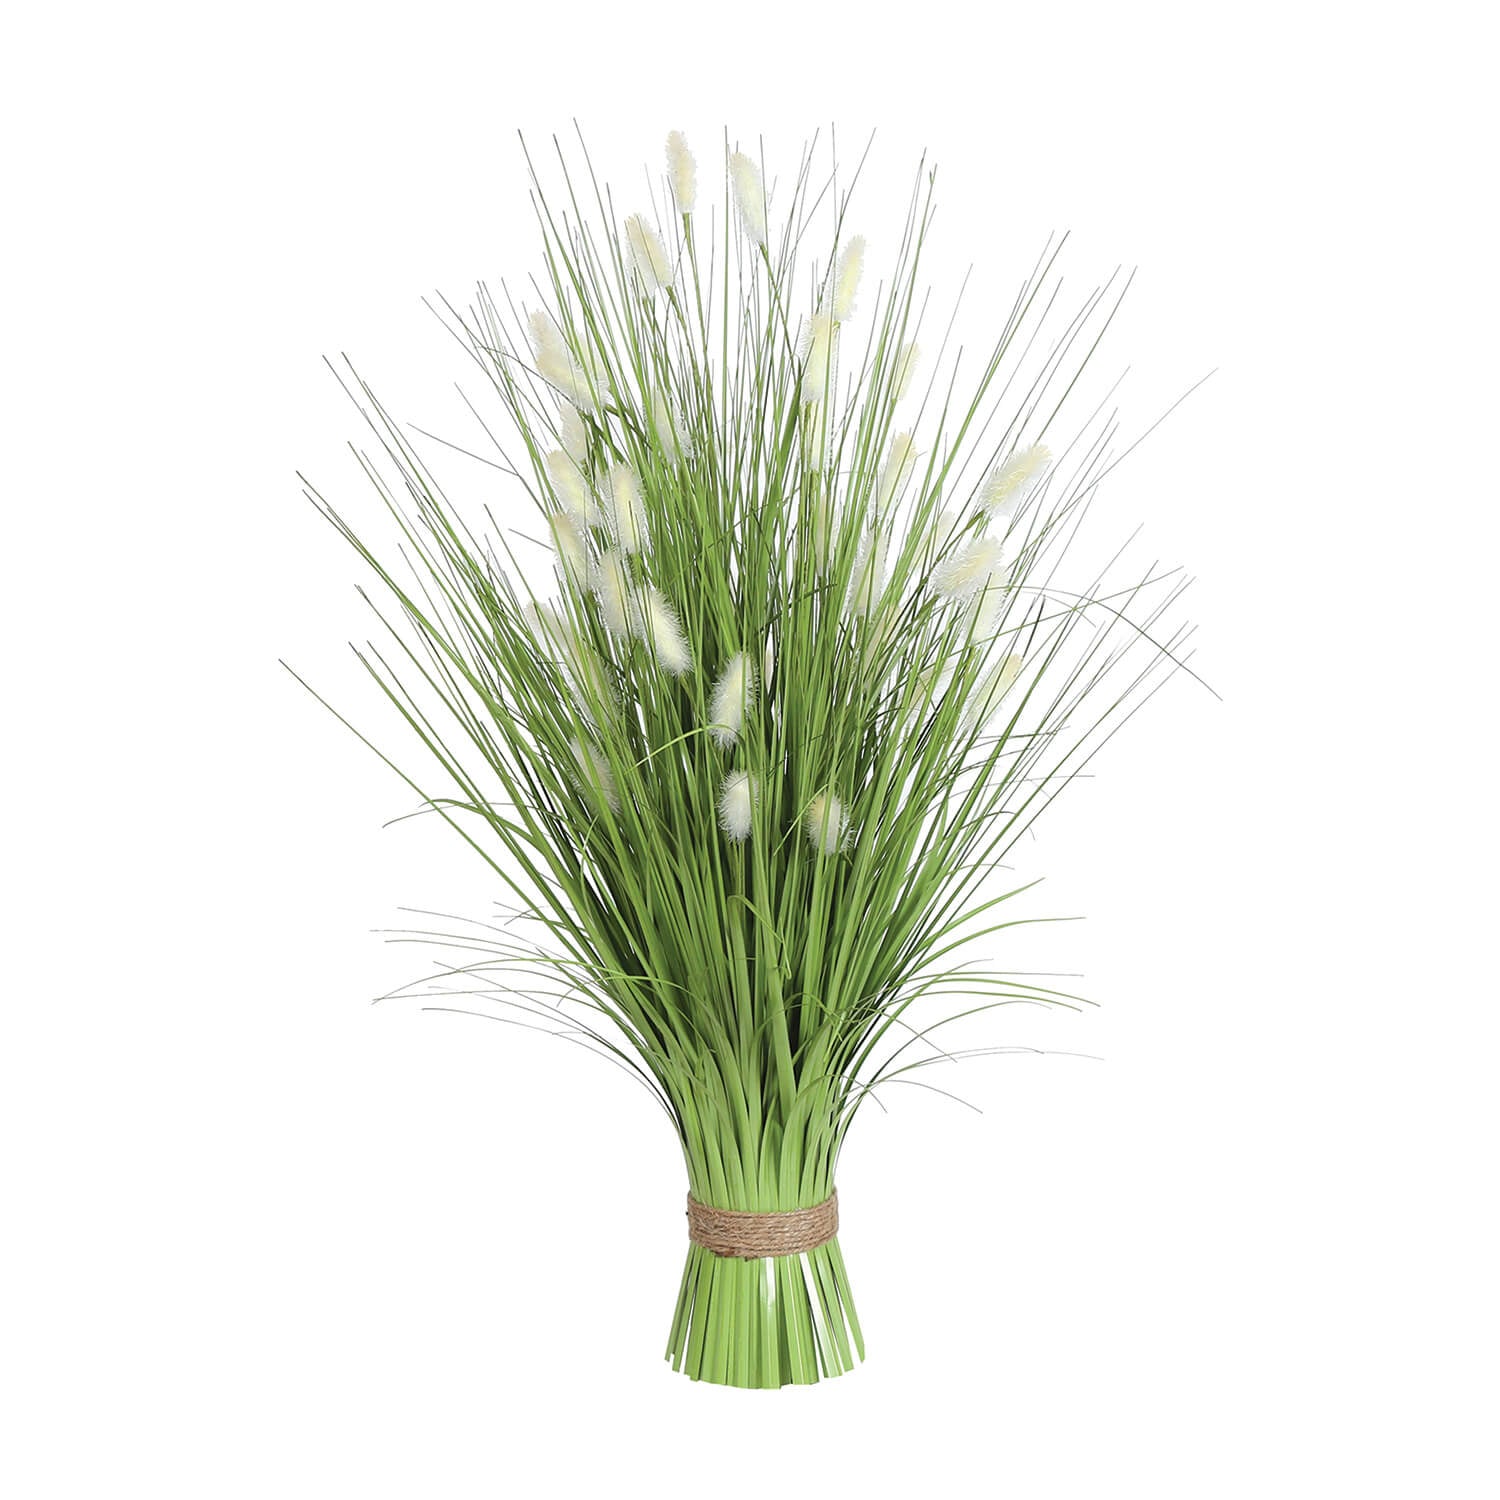 The Home Green Bristle Grass - 70cm 1 Shaws Department Stores